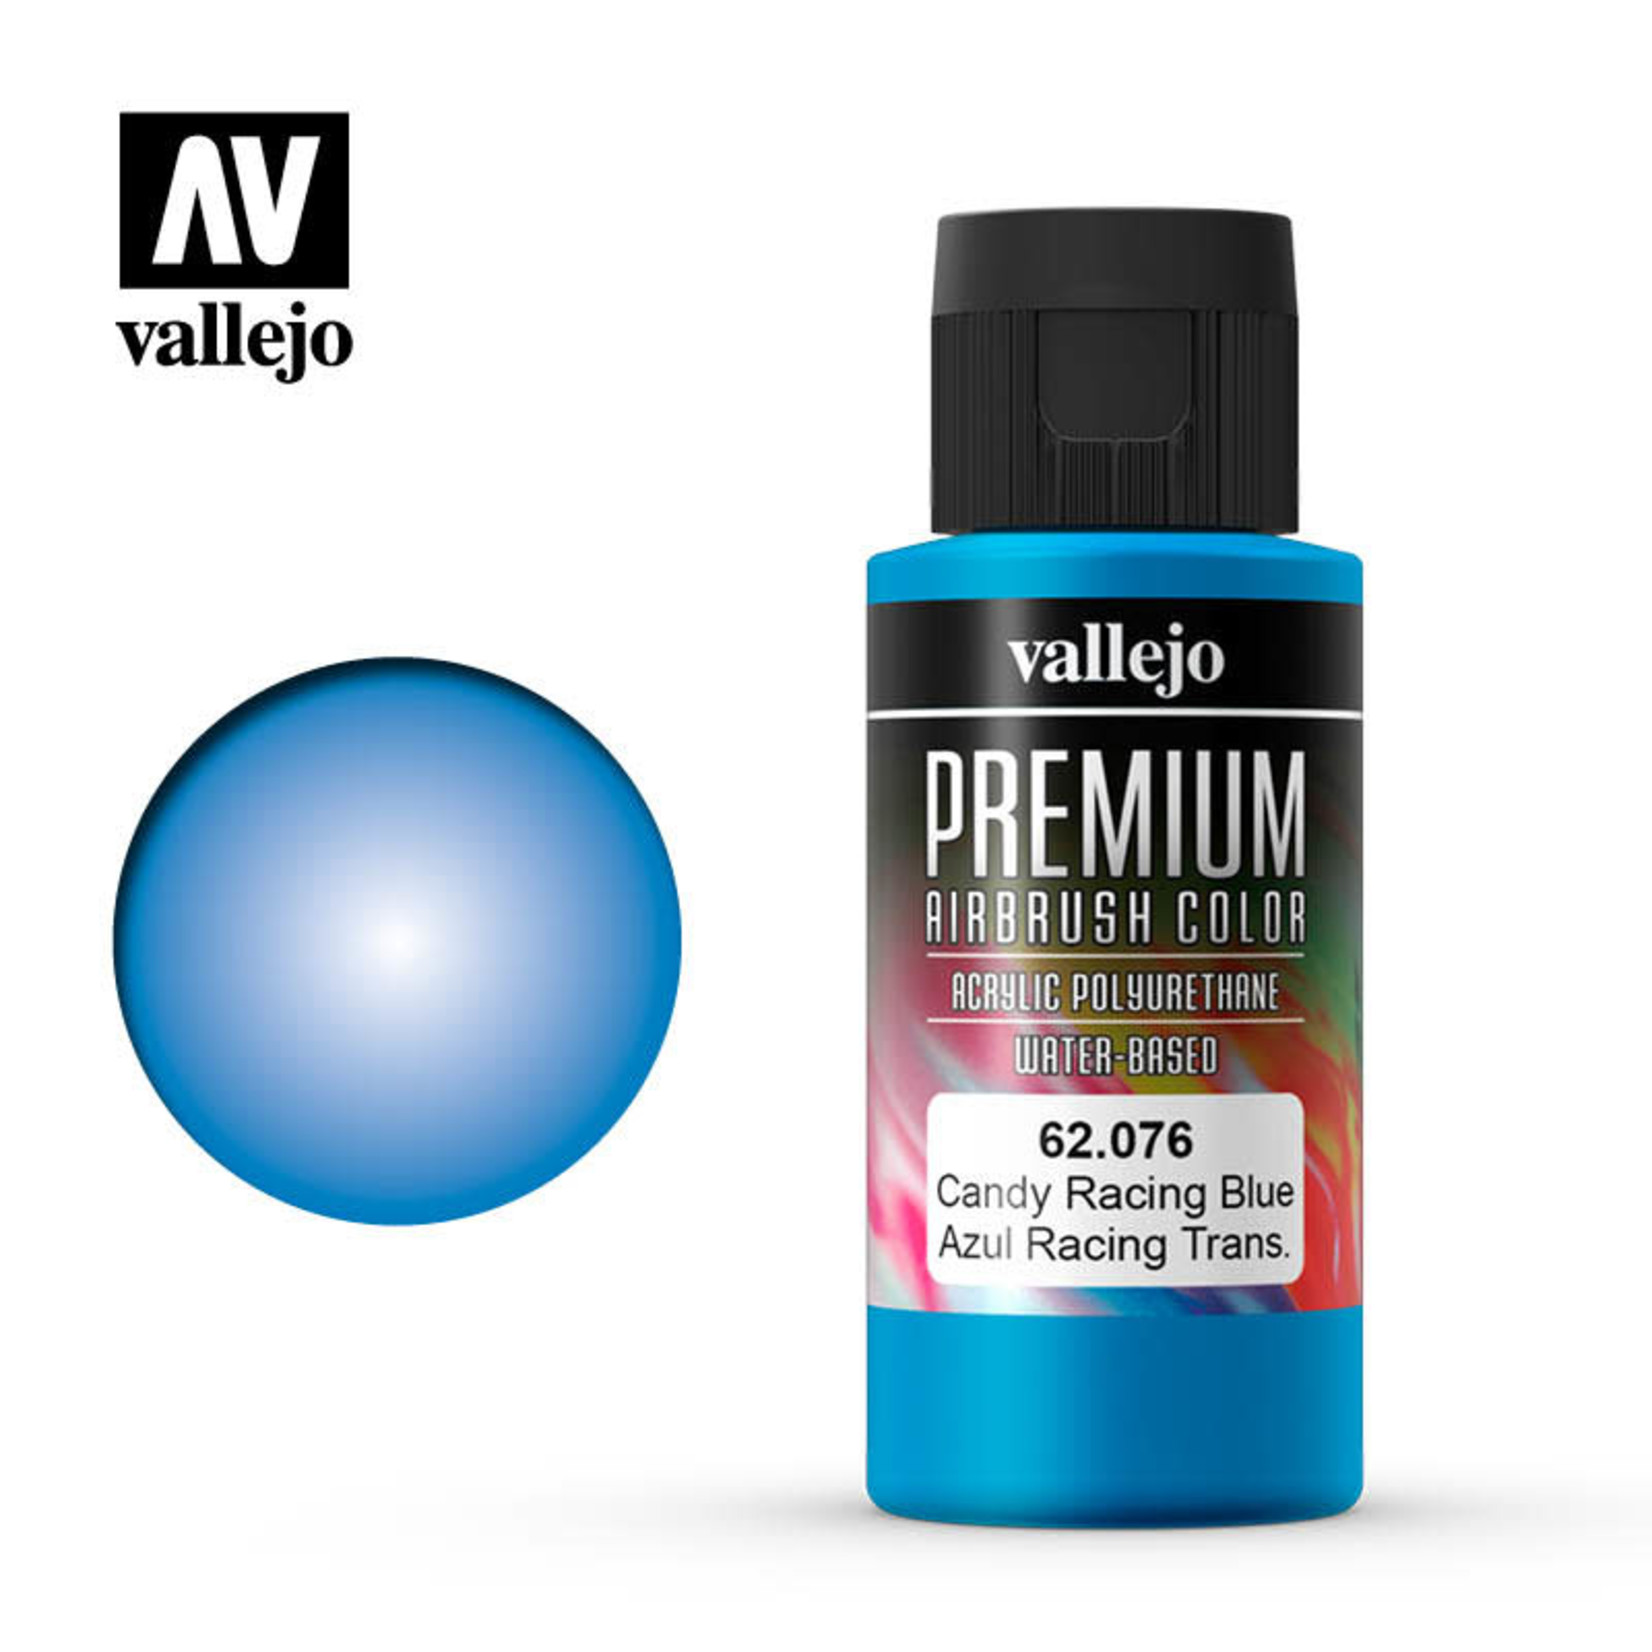 Vallejo VAL62076 Premium Airbrush Color Candy Racing Blue (60ml)